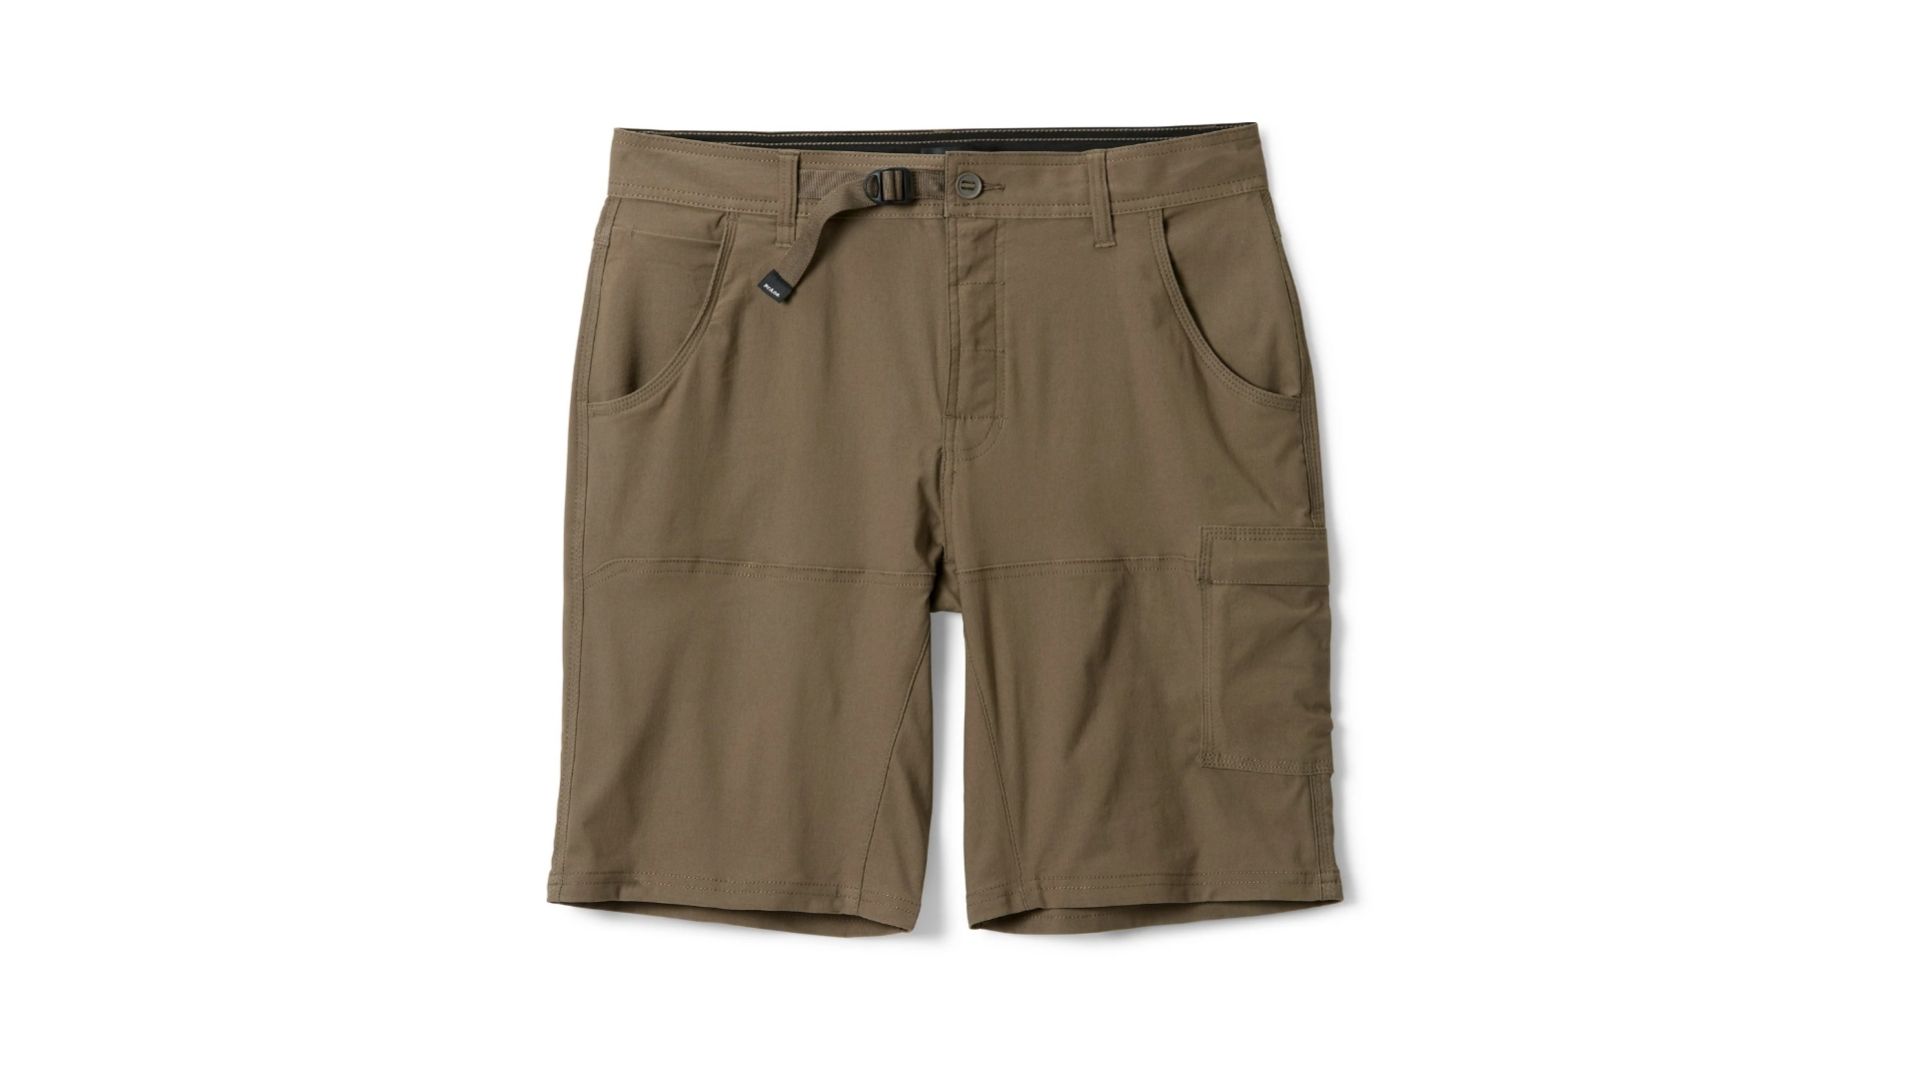 Best Hiking Shorts (Review & Buying Guide) in 2023 - Task & Purpose